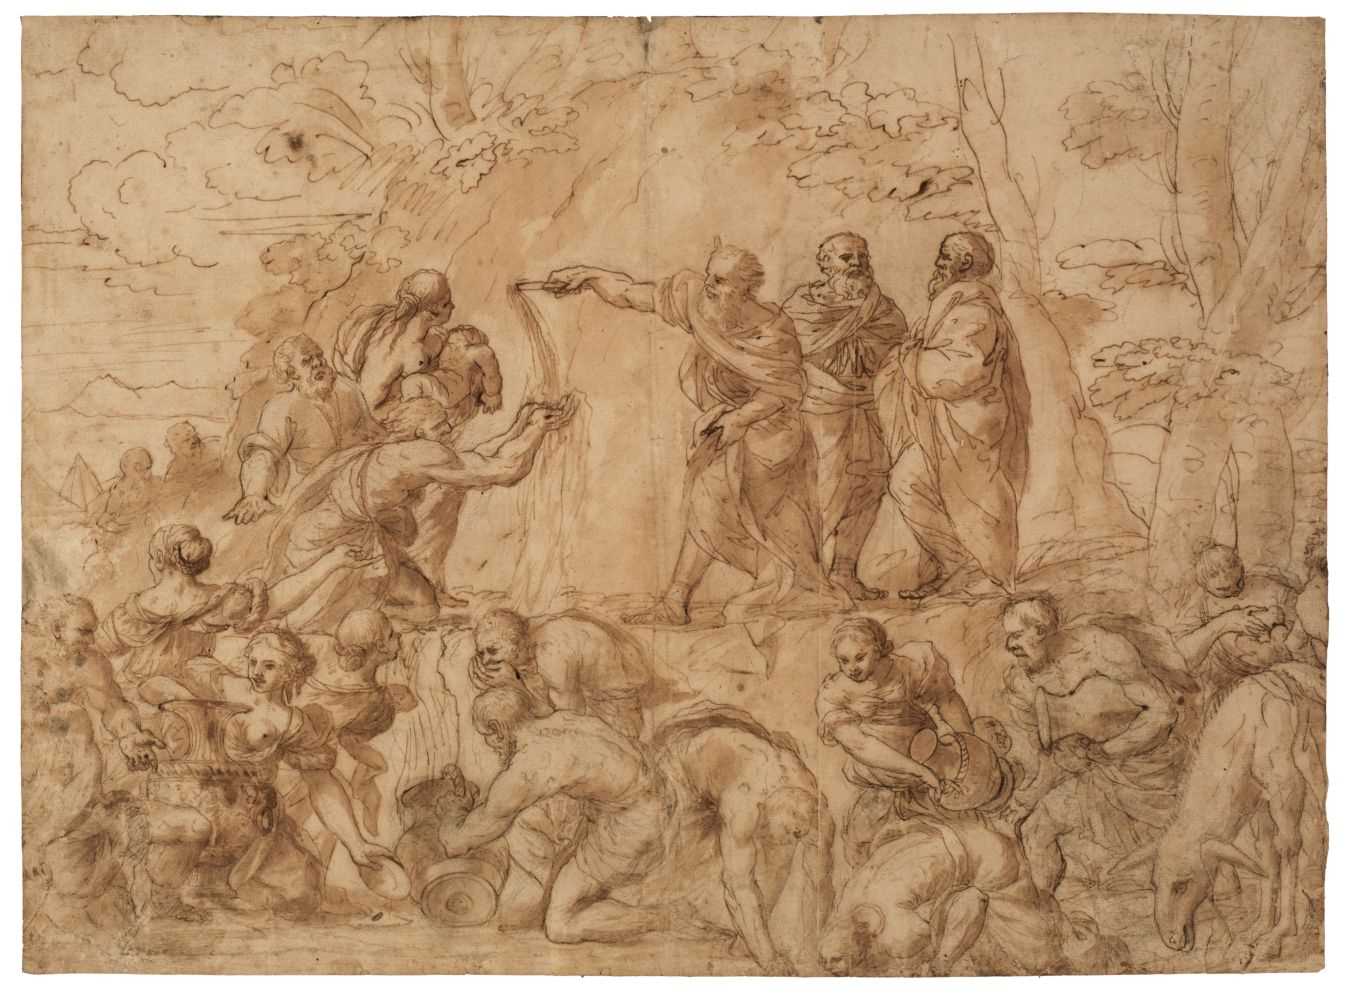 Lot 330 - Romanelli (Giovanni Francesco, 1610-1662, attributed to). Moses striking water from the rock